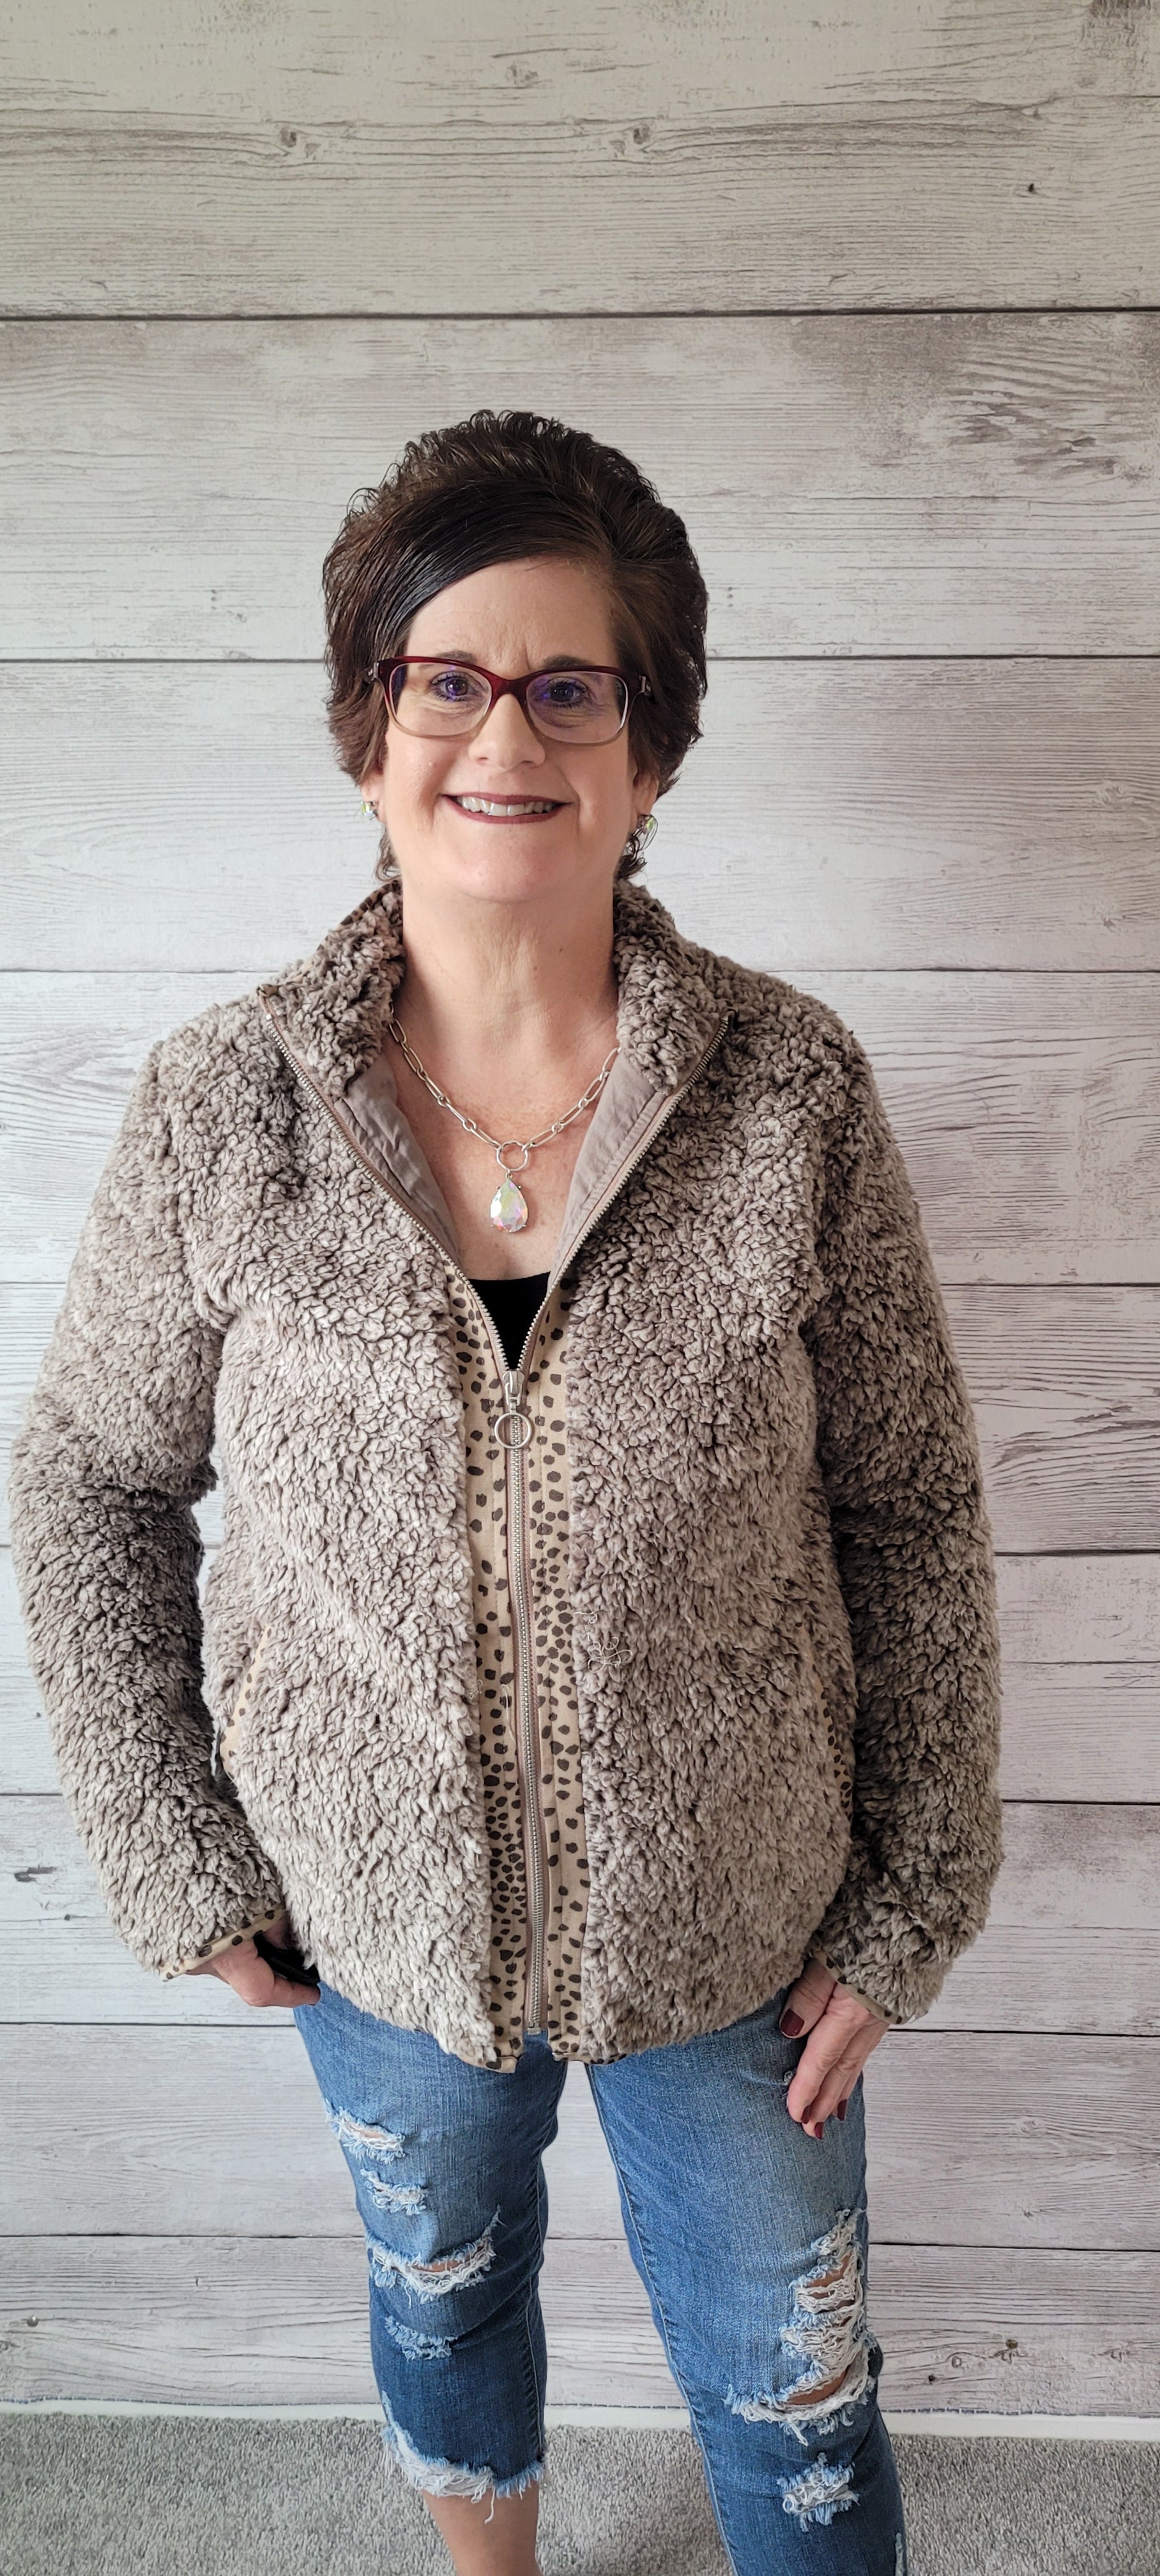 Stay warm and stylish with the "Brooke Olive Fleece Jacket"! Perfect for those chilly days, this cozy and oh-so-soft jacket has printed trim detail, side pockets, and a lined interior. It's zipped-up fun with a fashion twist! Sizes small through large.